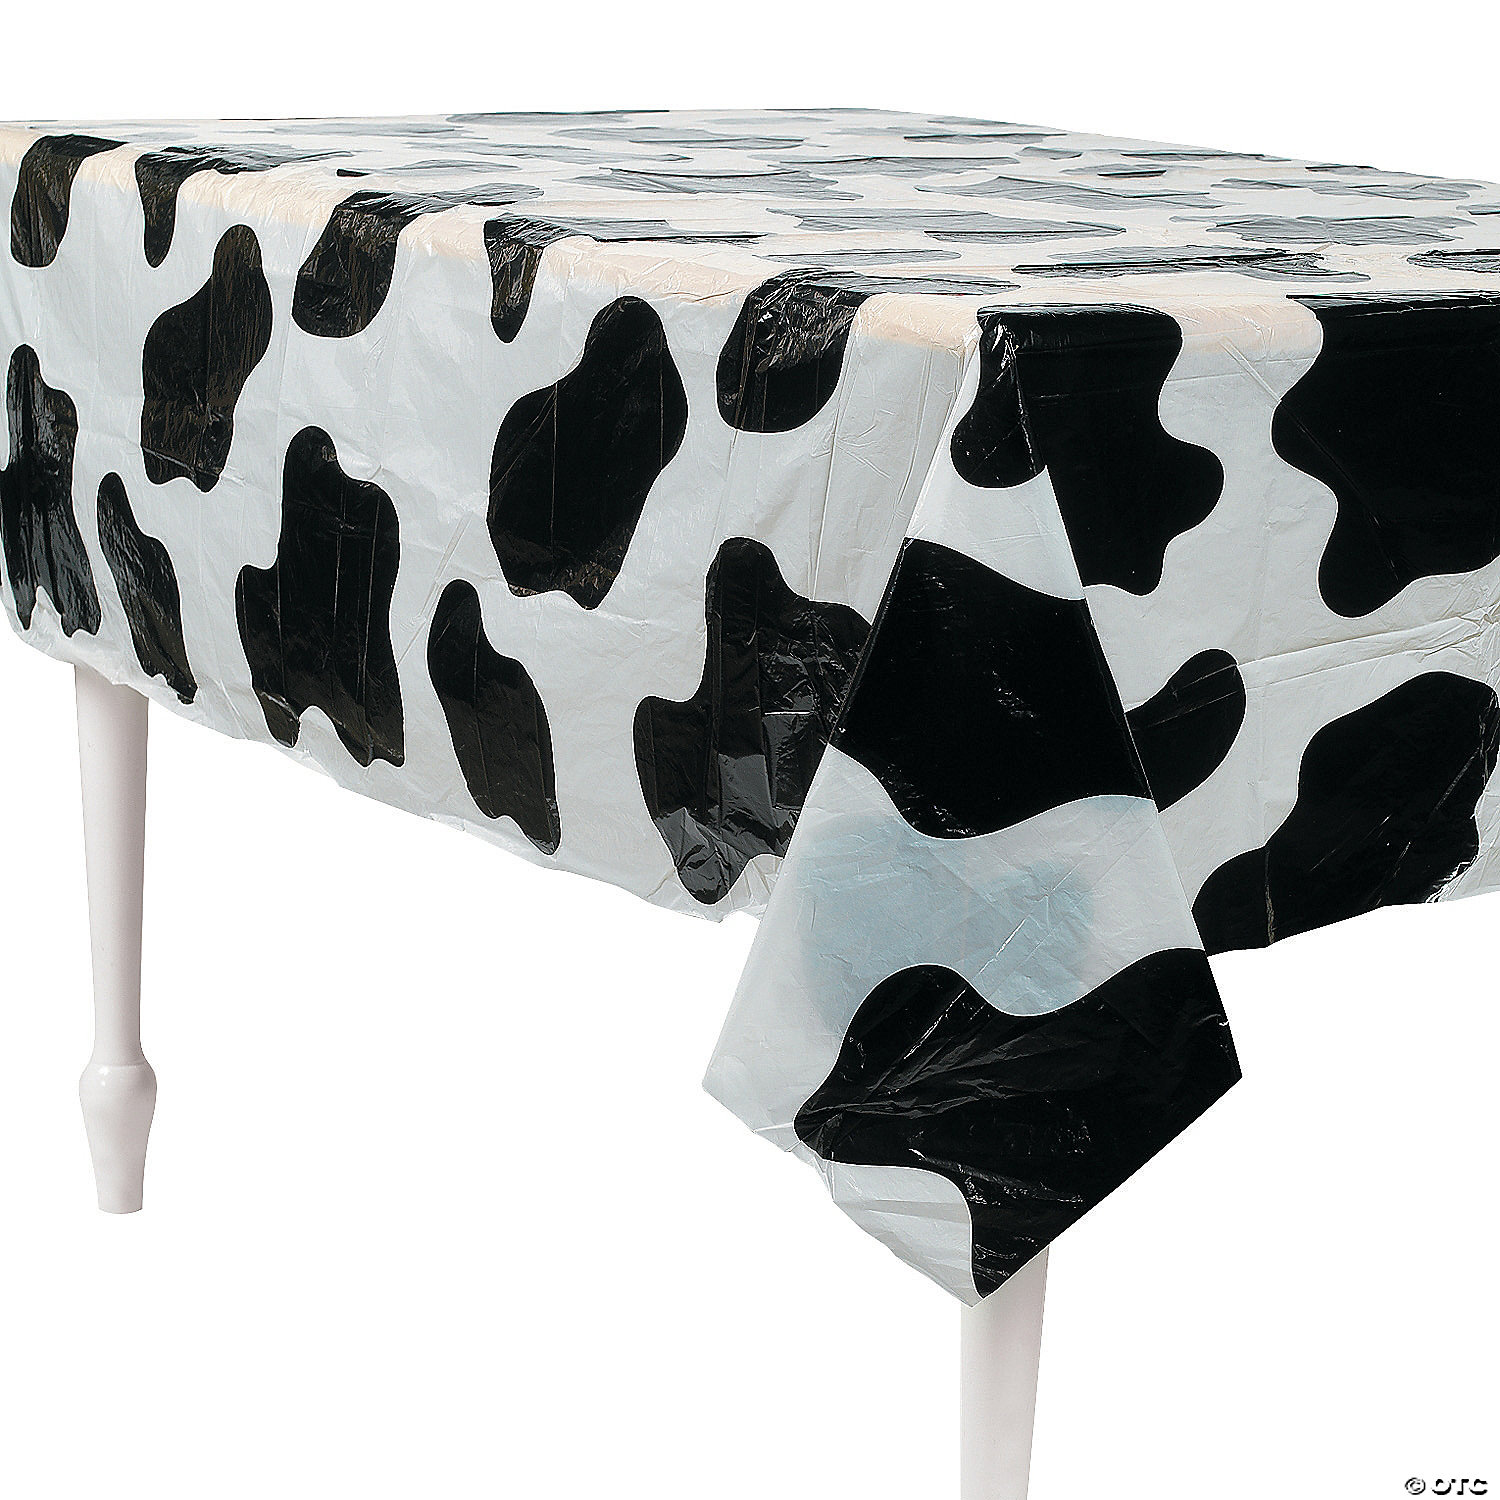 Plastic Cow Table Cover Table Decoration for Farm Cow Barnyard Theme Birthday Baby Shower Party Farm Party Tablecloth Table Cover MEMOVAN 3pcs Cow Tablecloth Cow Party Tablecloth 